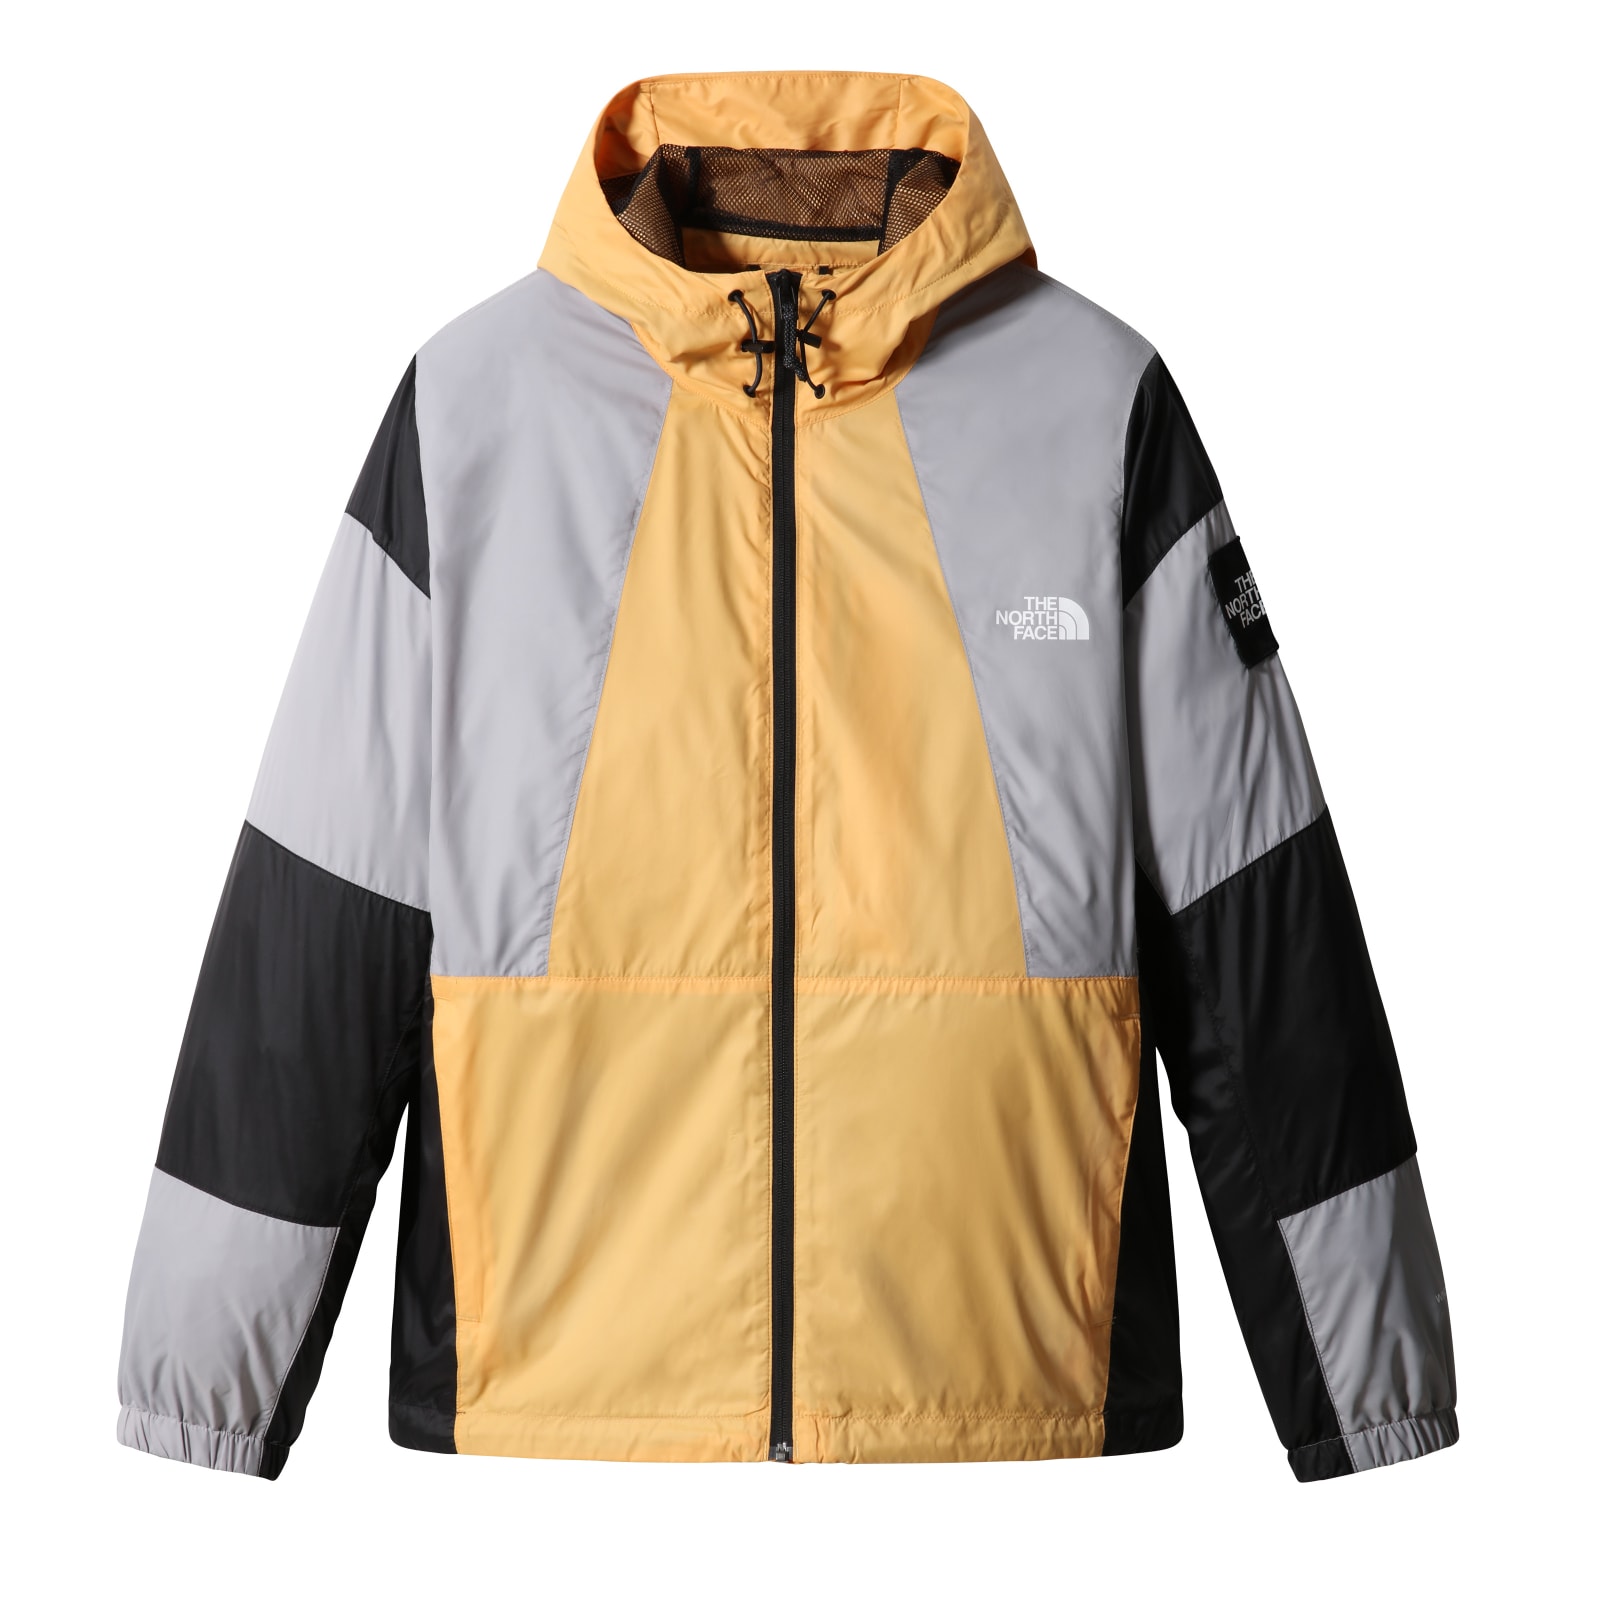 The North Face M Phlego Wind Jacket